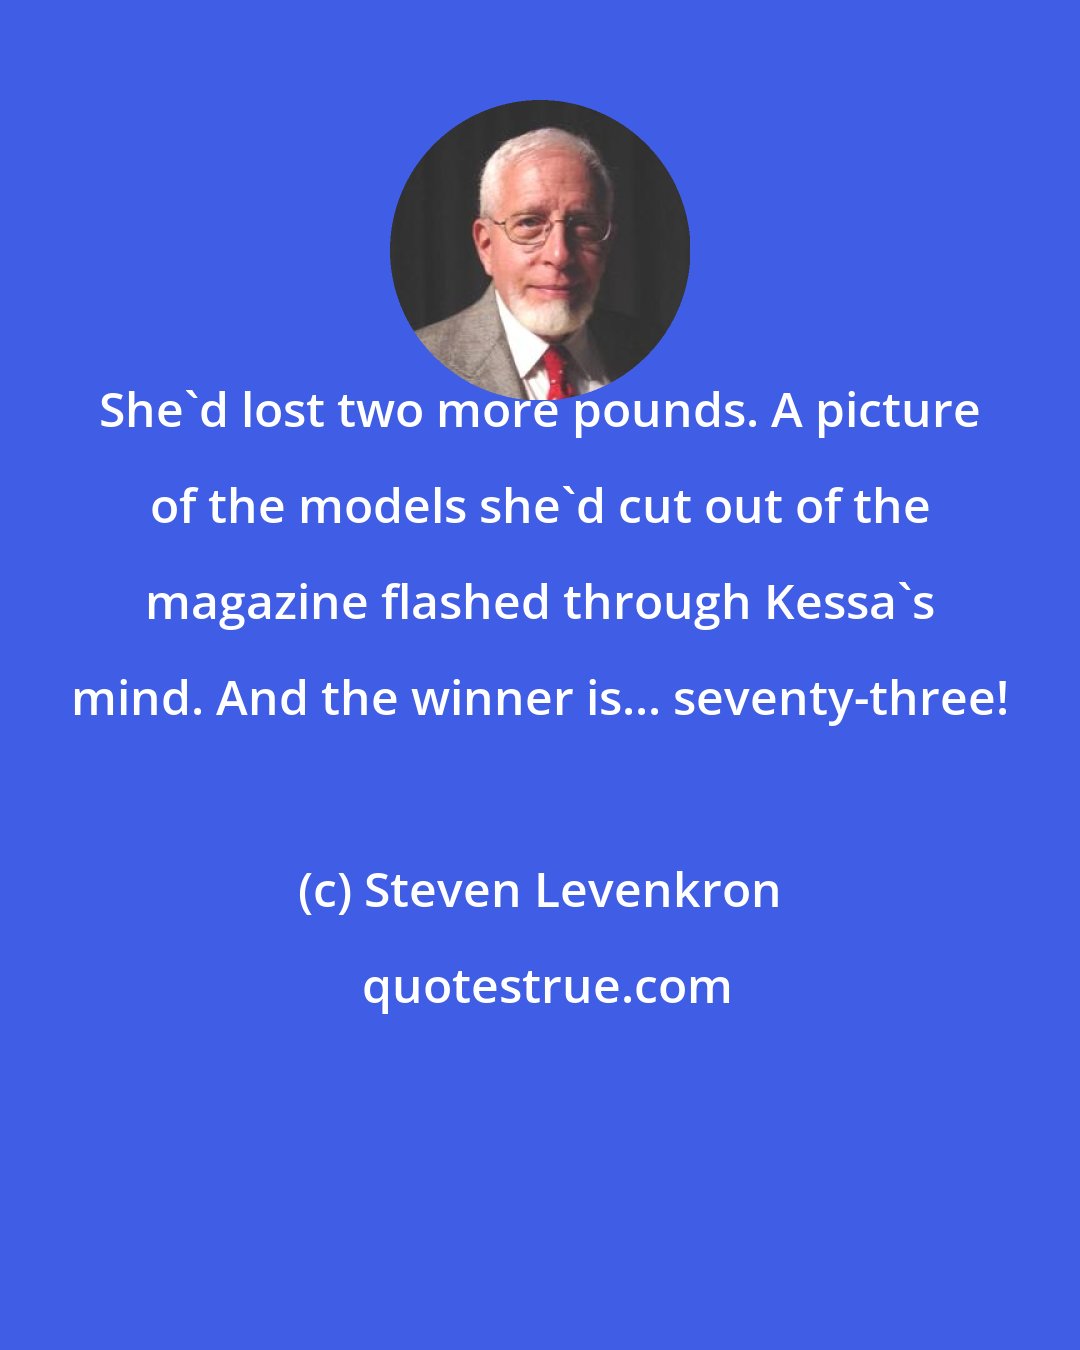 Steven Levenkron: She'd lost two more pounds. A picture of the models she'd cut out of the magazine flashed through Kessa's mind. And the winner is... seventy-three!